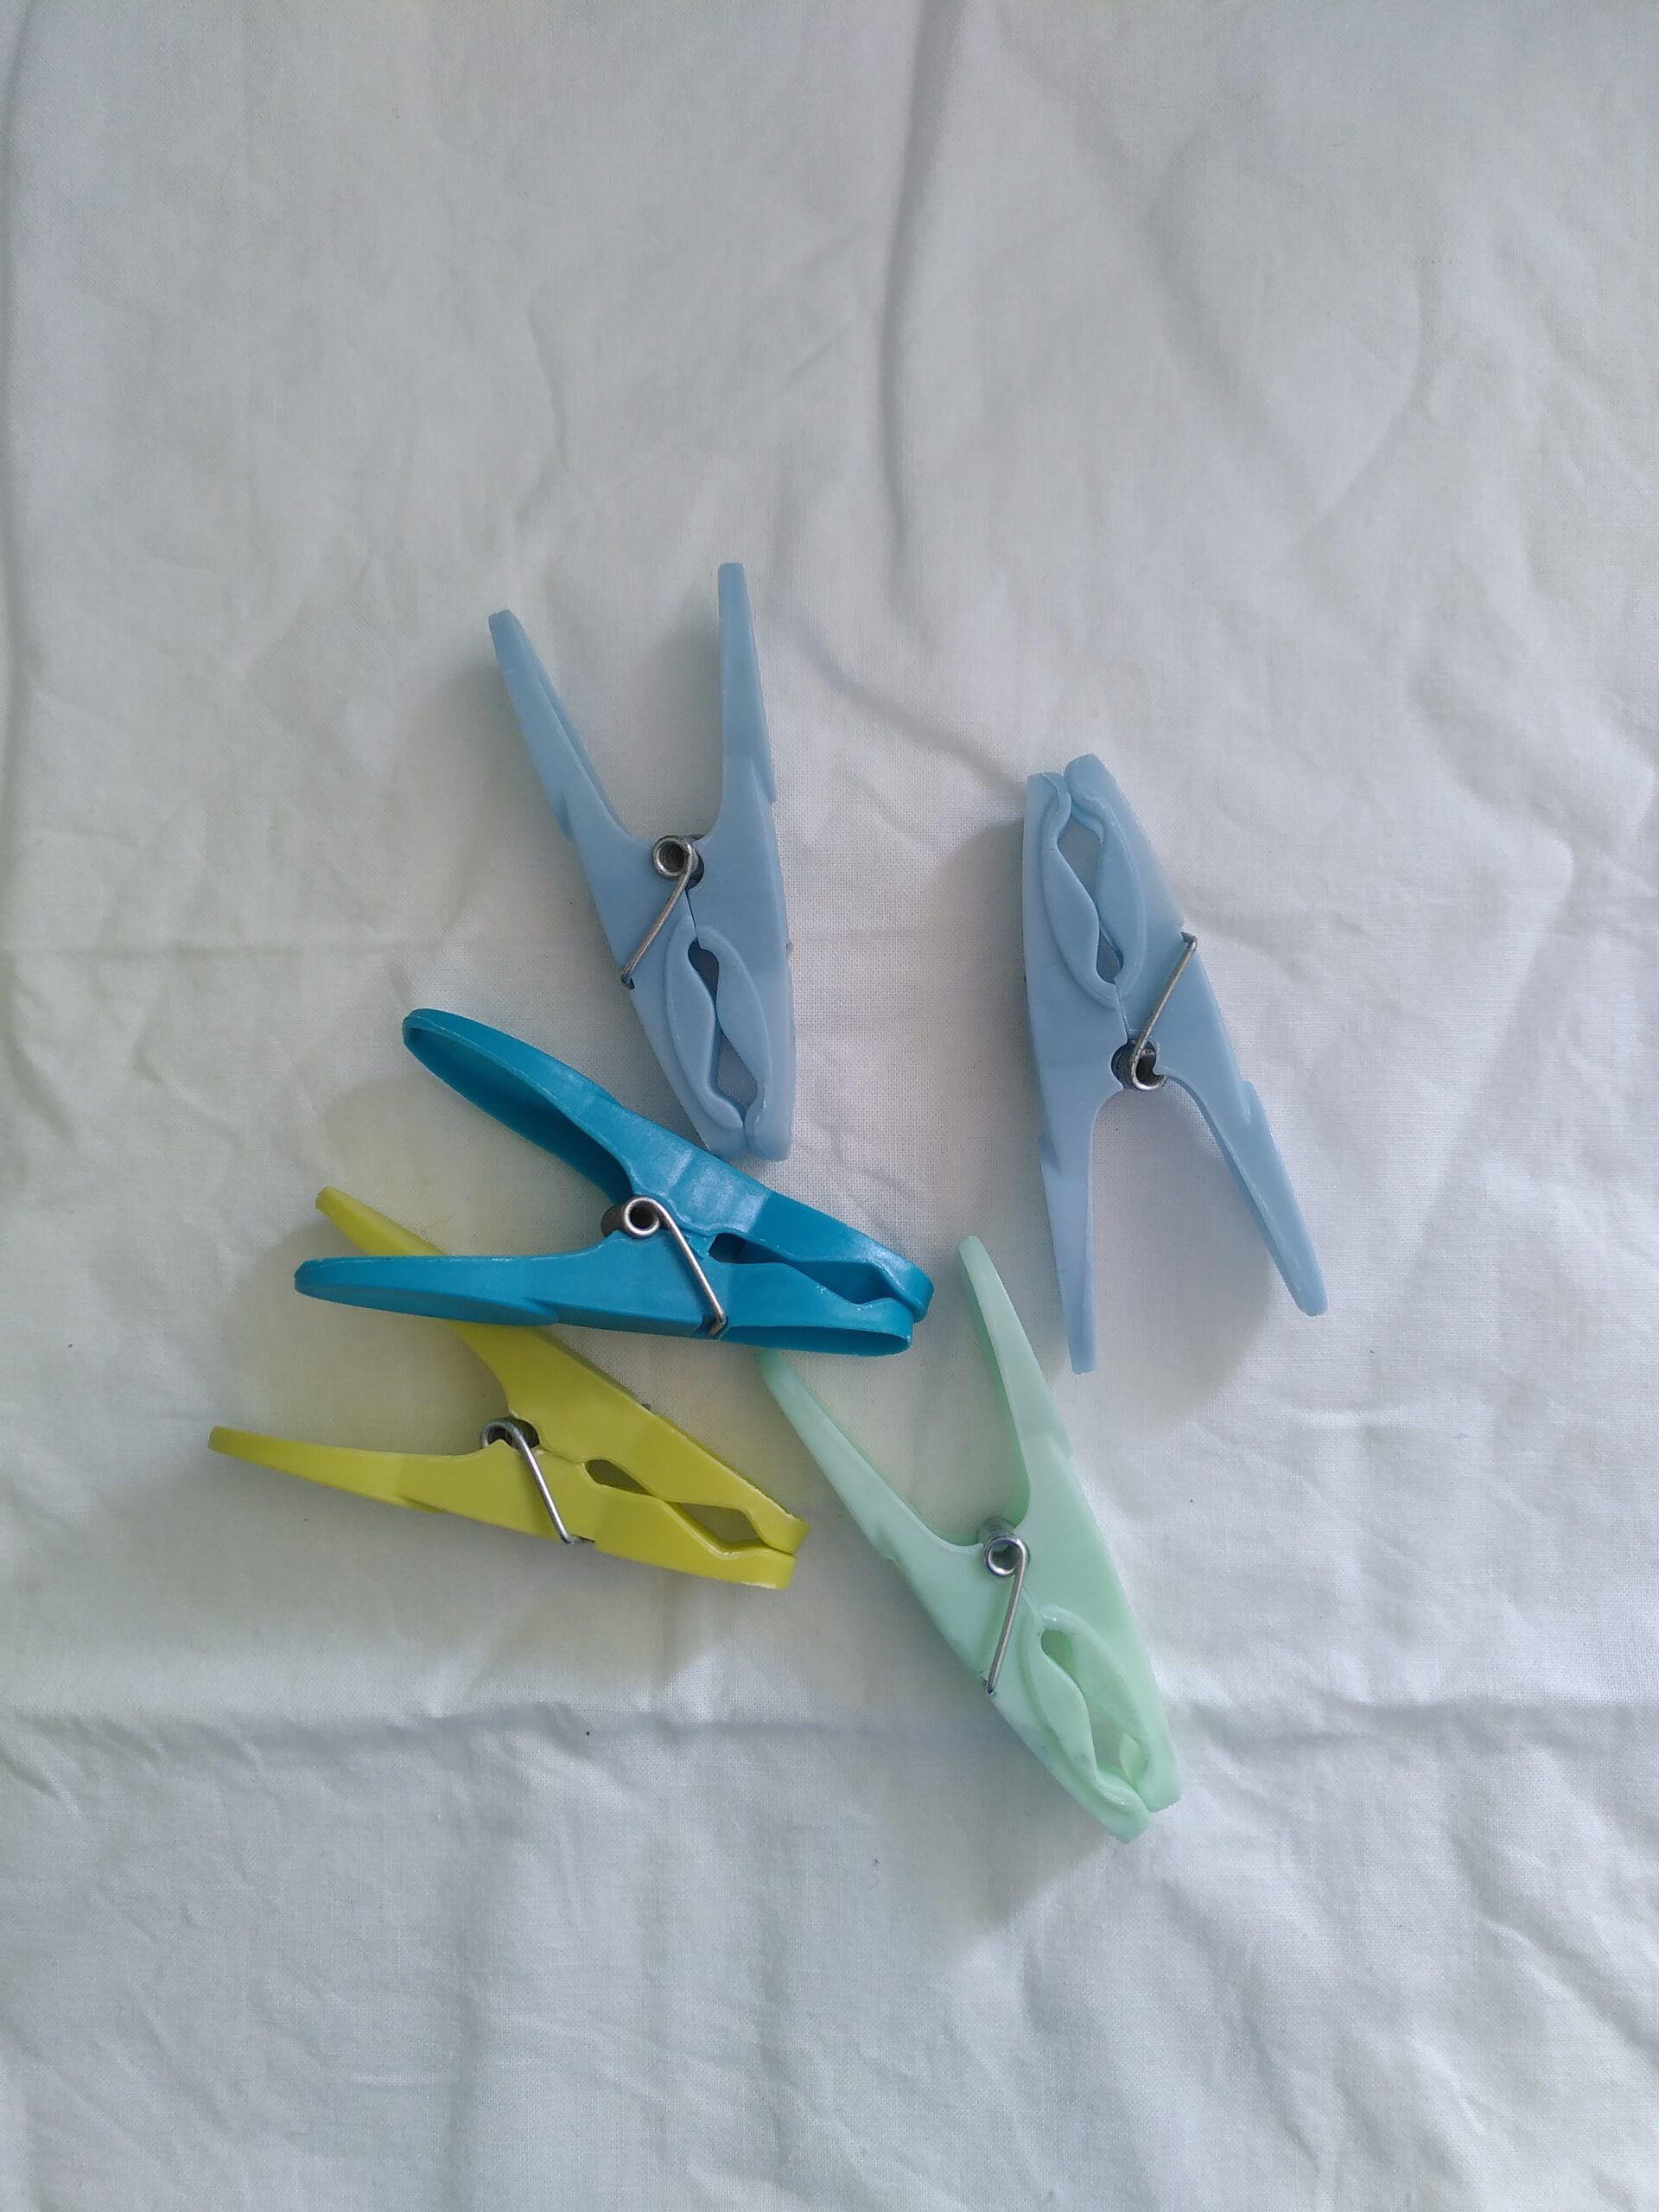 Five plastic pegs, two light blue, one yellow, one light green and the fifth bright blue, lying on a creased white background